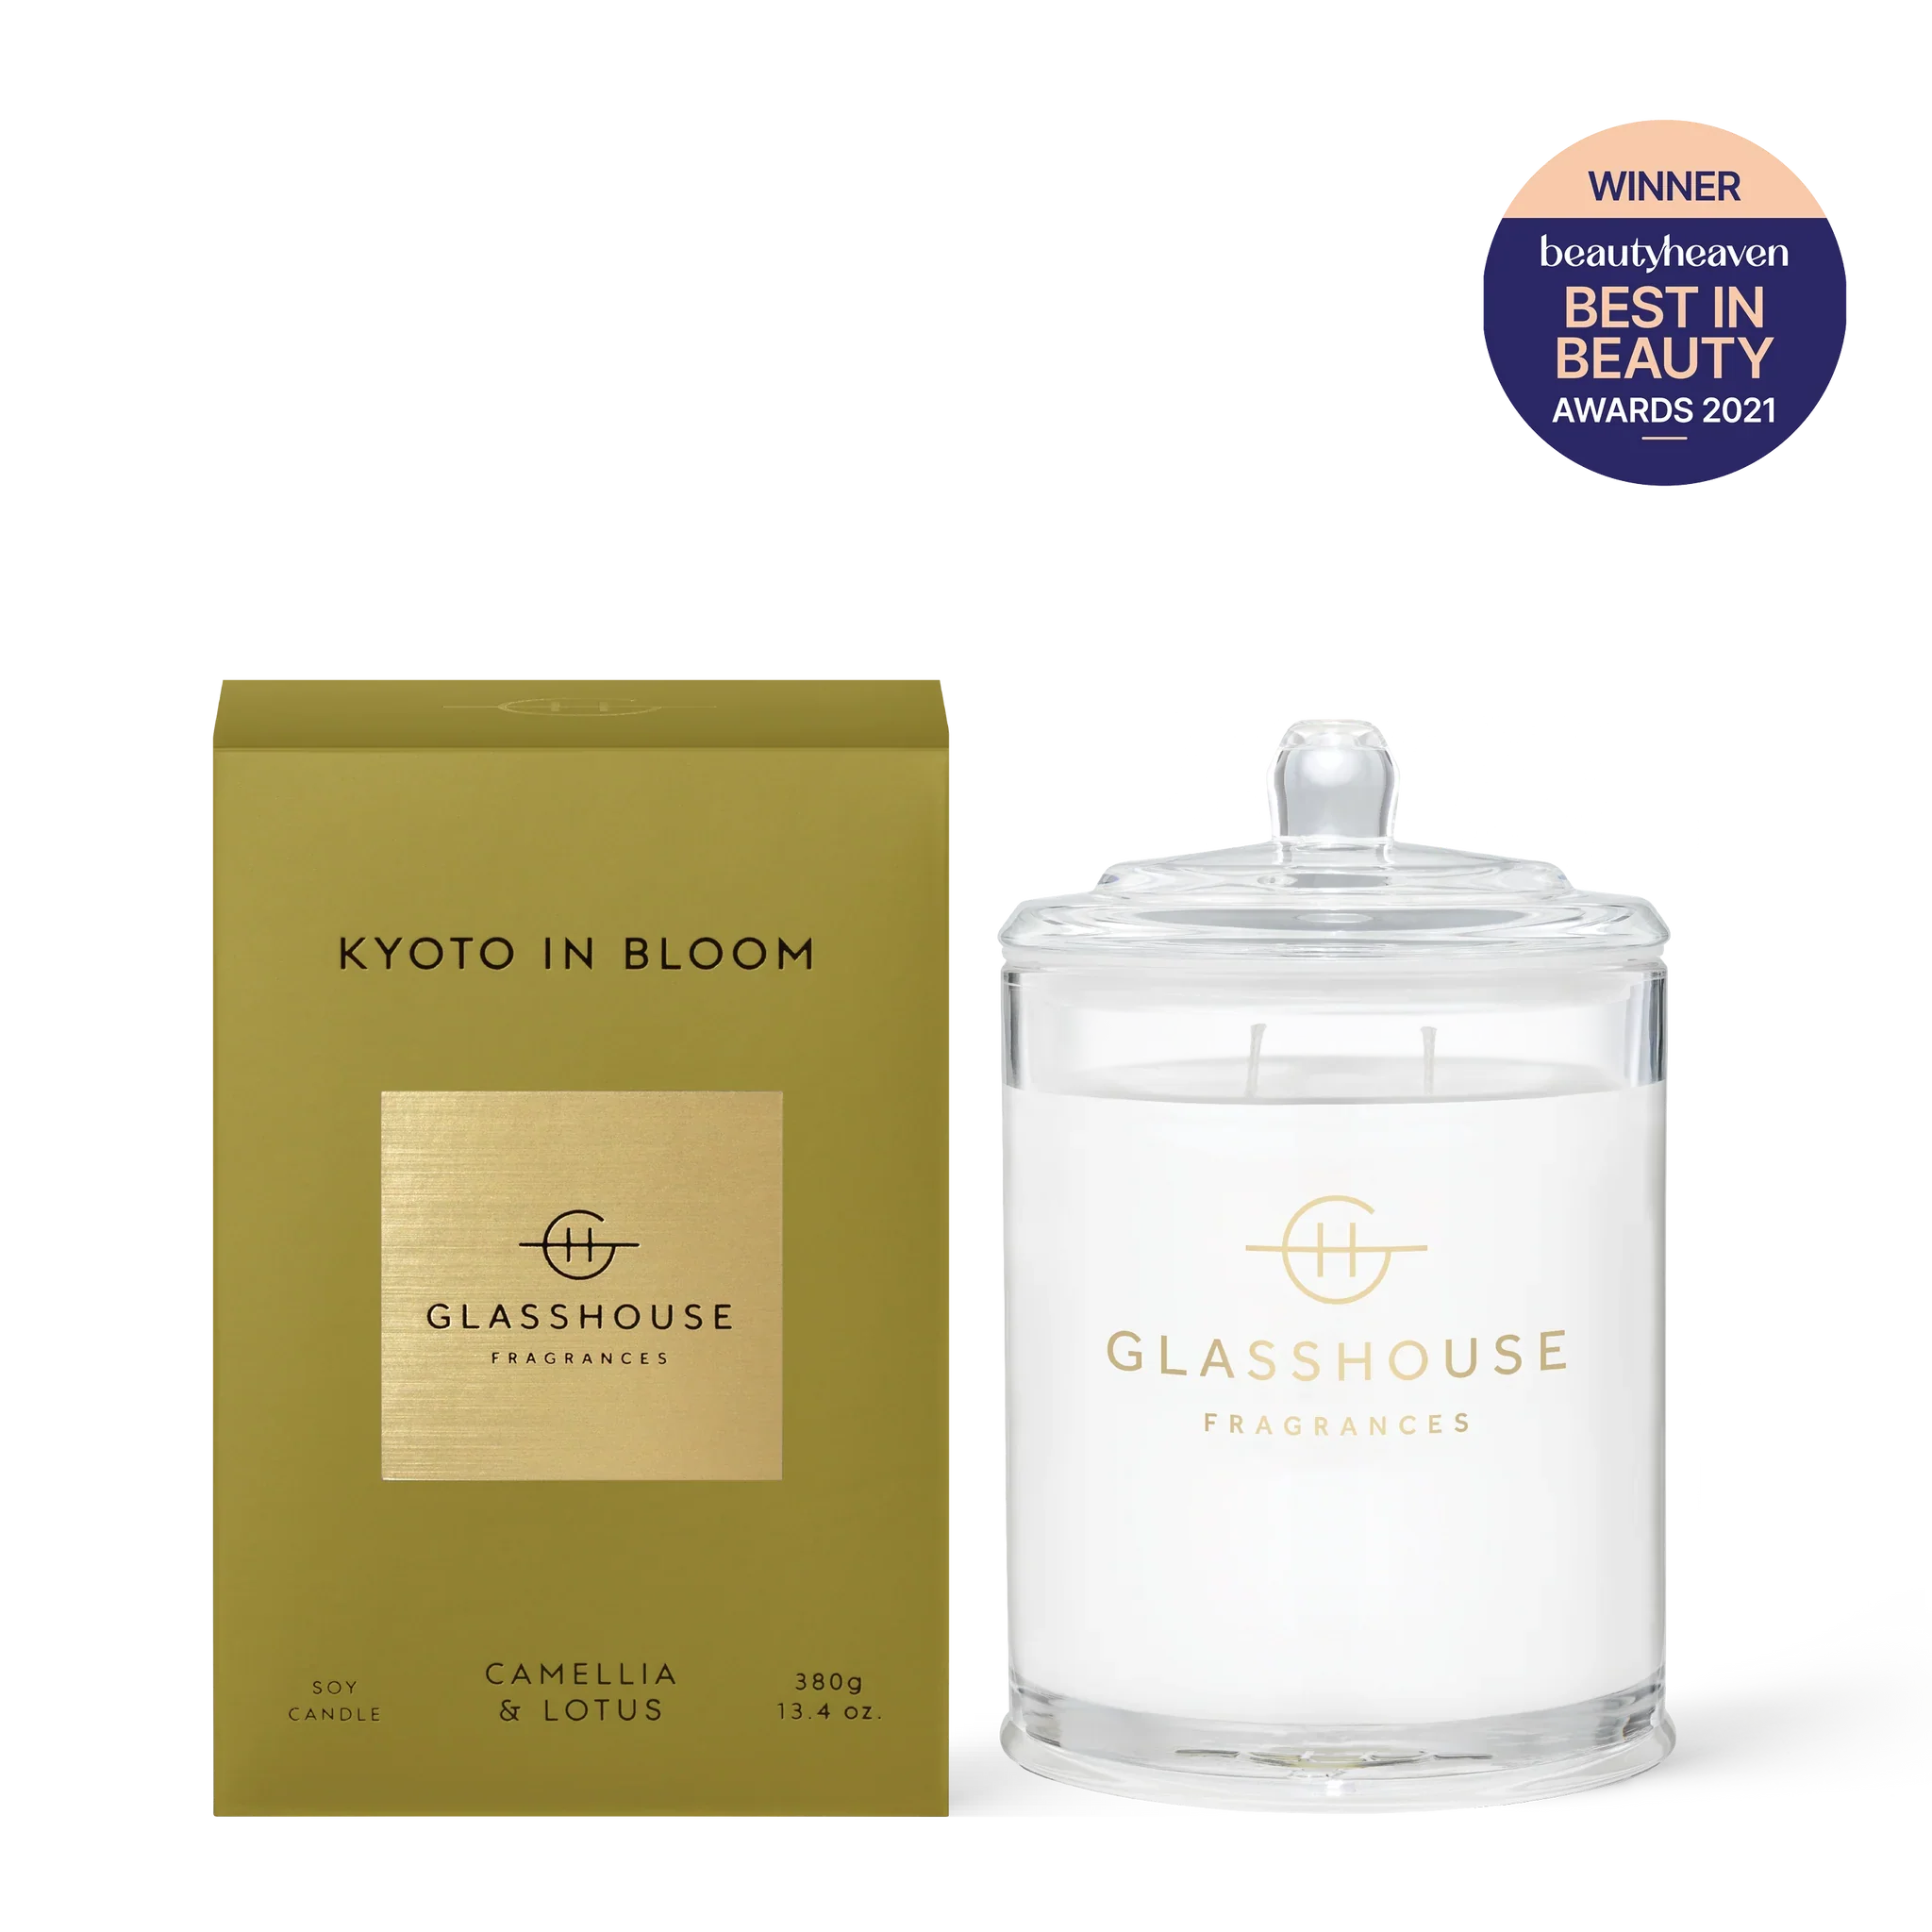 Kyoto in Bloom Candle 380G